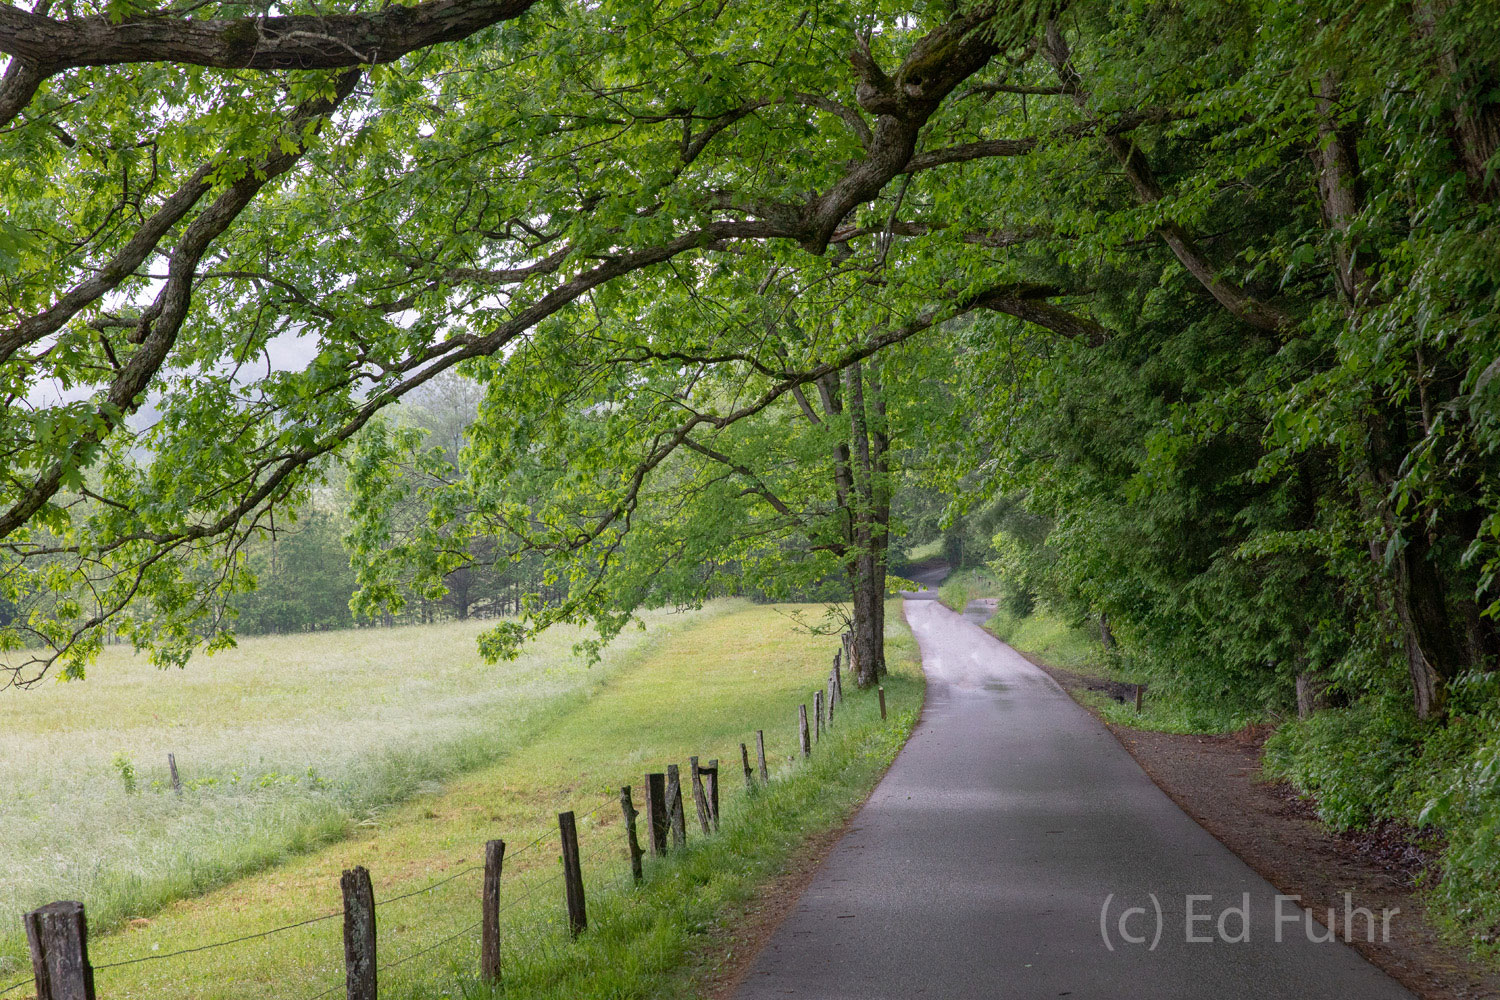 Large oaks hang over the Cades Cove Road as the Road makes its final climb.